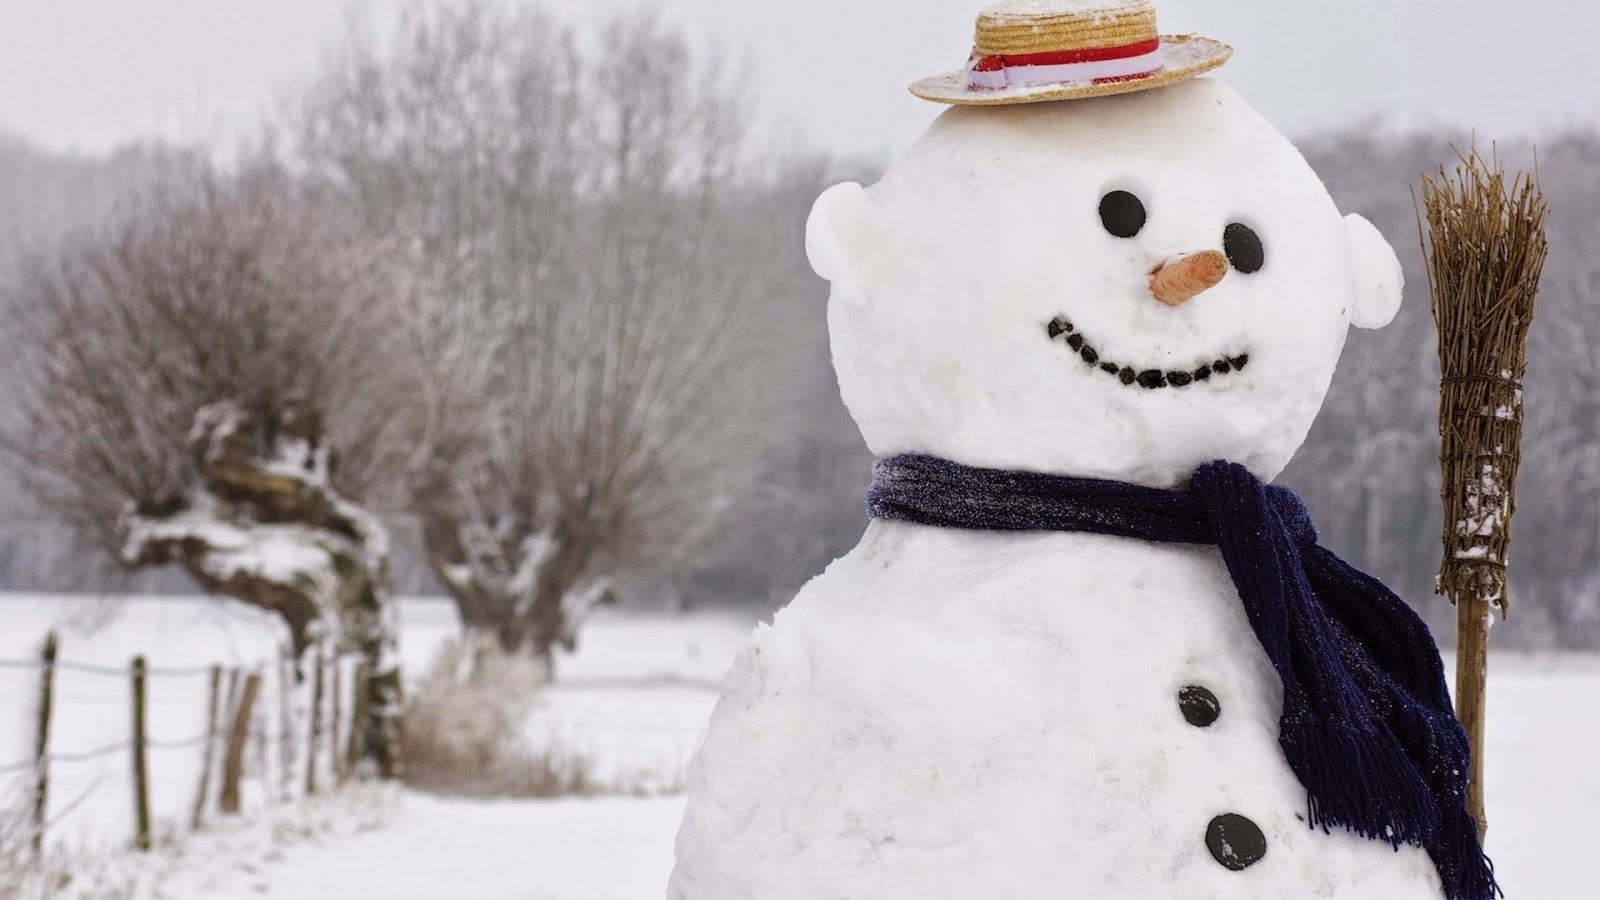 Snowman Doll Home Made Outdoor Costume Design Theme Wallpaper HD Image